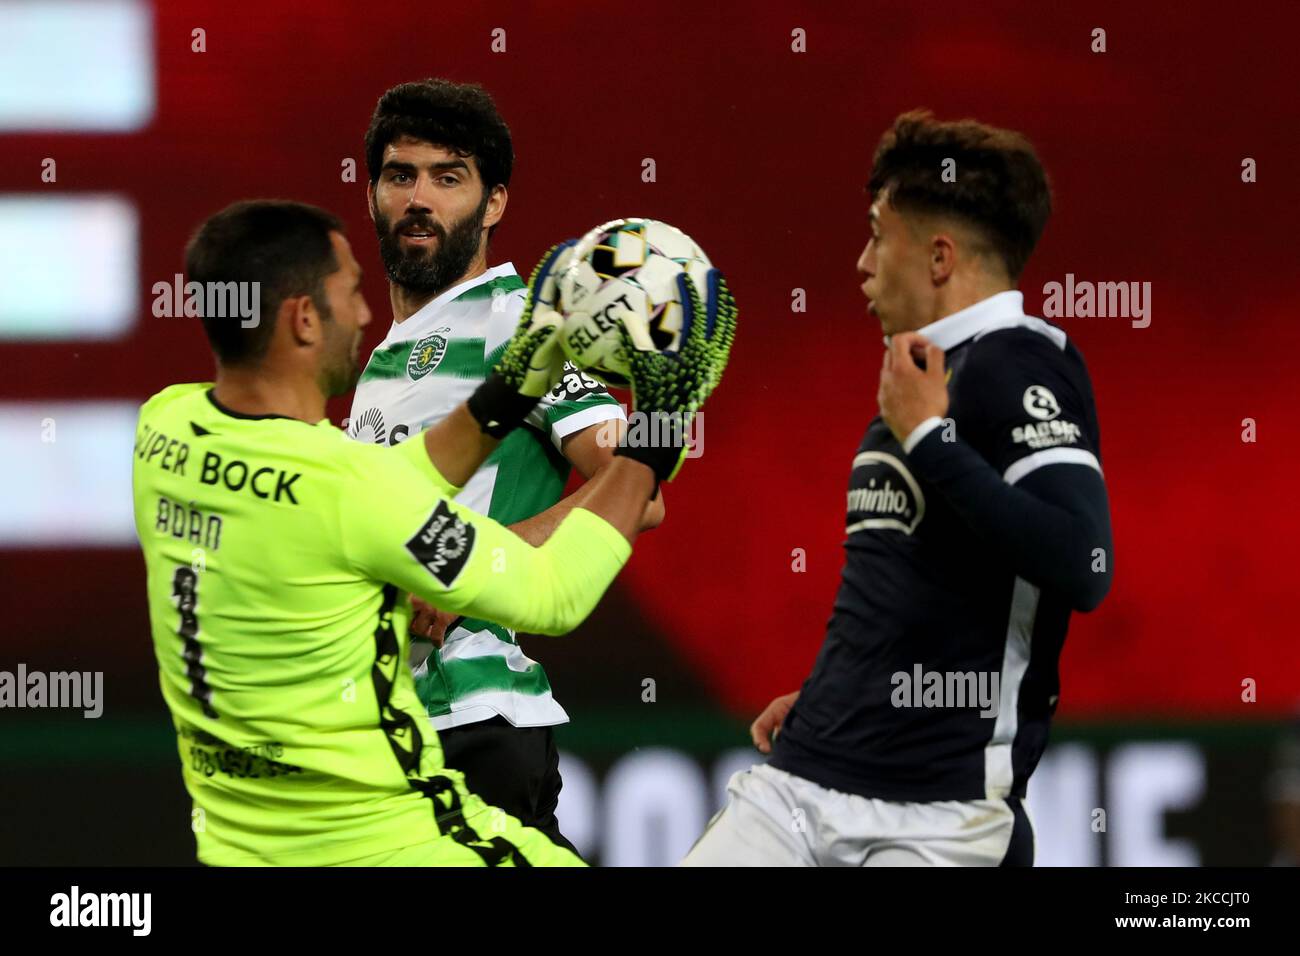 Luis Neto of Sporting CP (C ) looks on as Sporting's goalkeeper Antonio Adan makes a safe during the Portuguese League football match between Sporting CP and FC Famalicao at Jose Alvalade stadium in Lisbon, Portugal on April 11, 2021. (Photo by Pedro FiÃºza/NurPhoto) Stock Photo